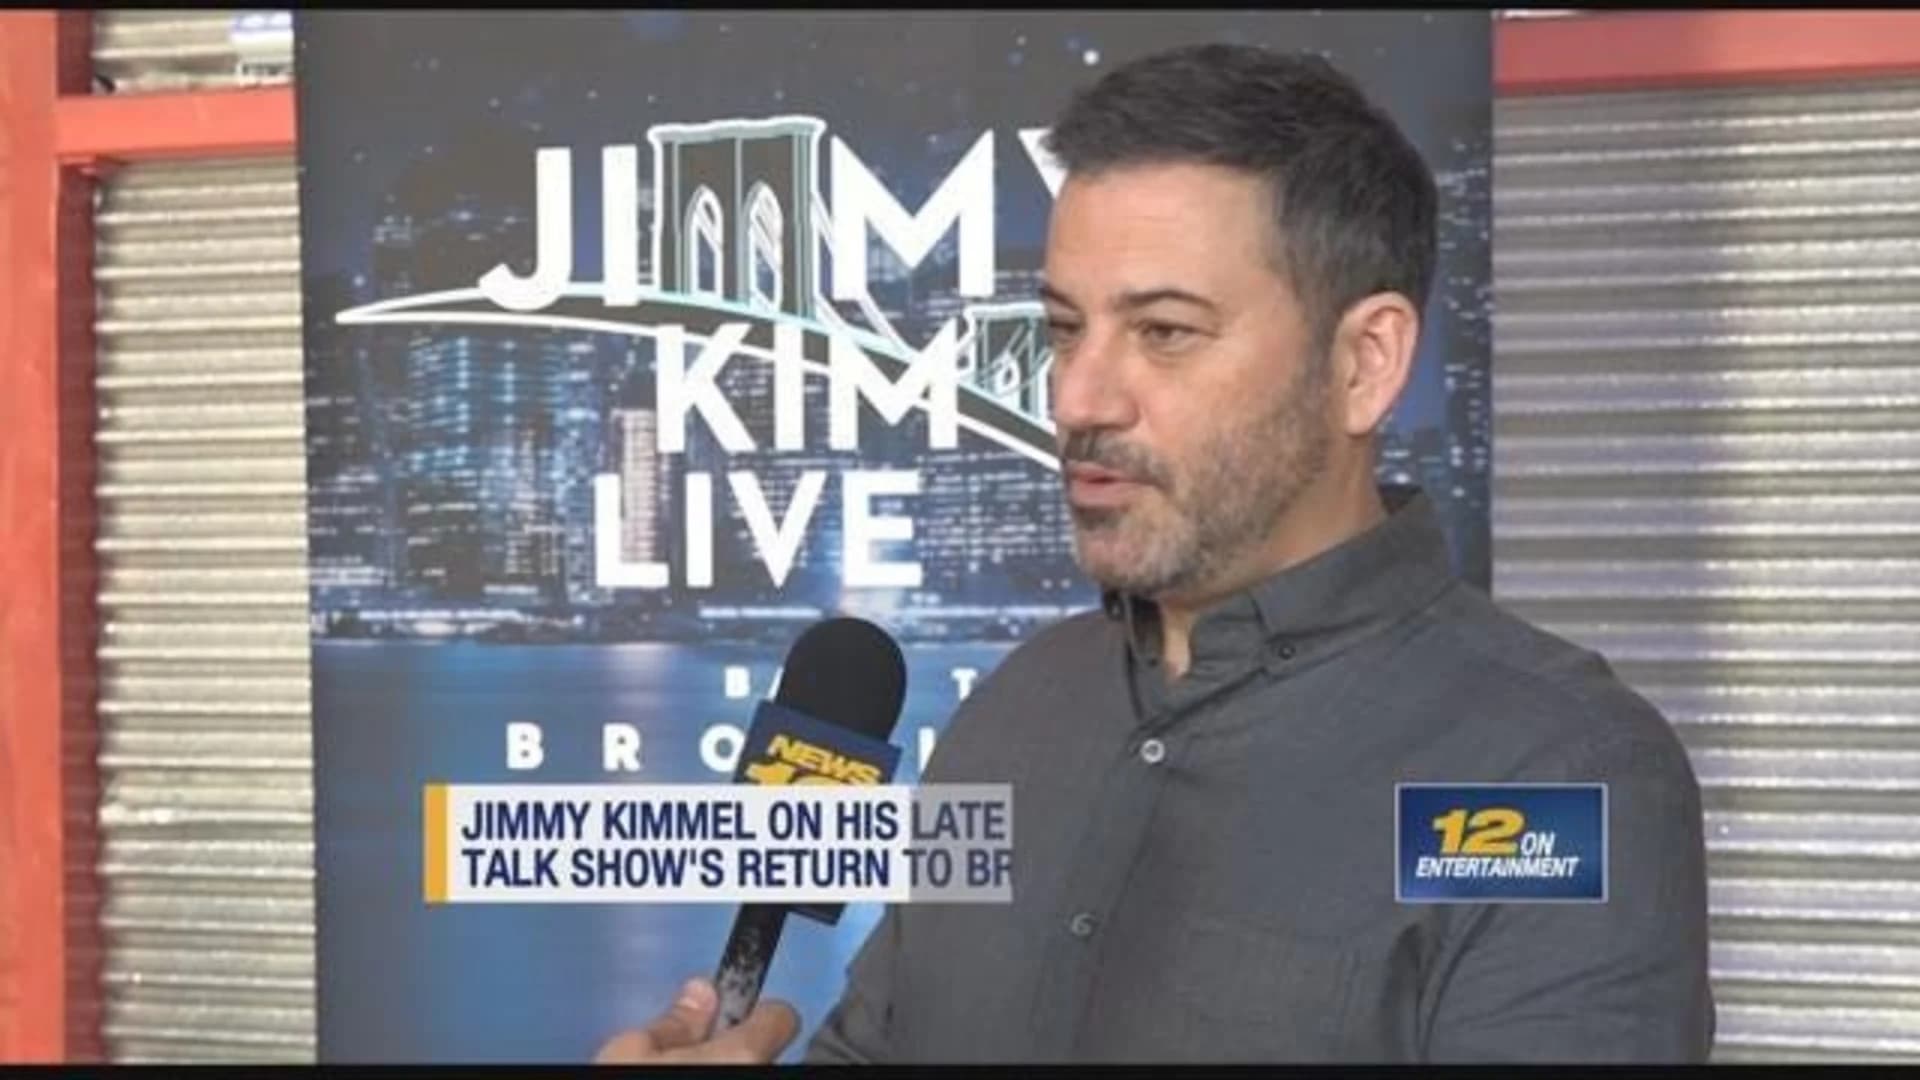 Jimmy Kimmel hosts live show in Brooklyn for 4th year